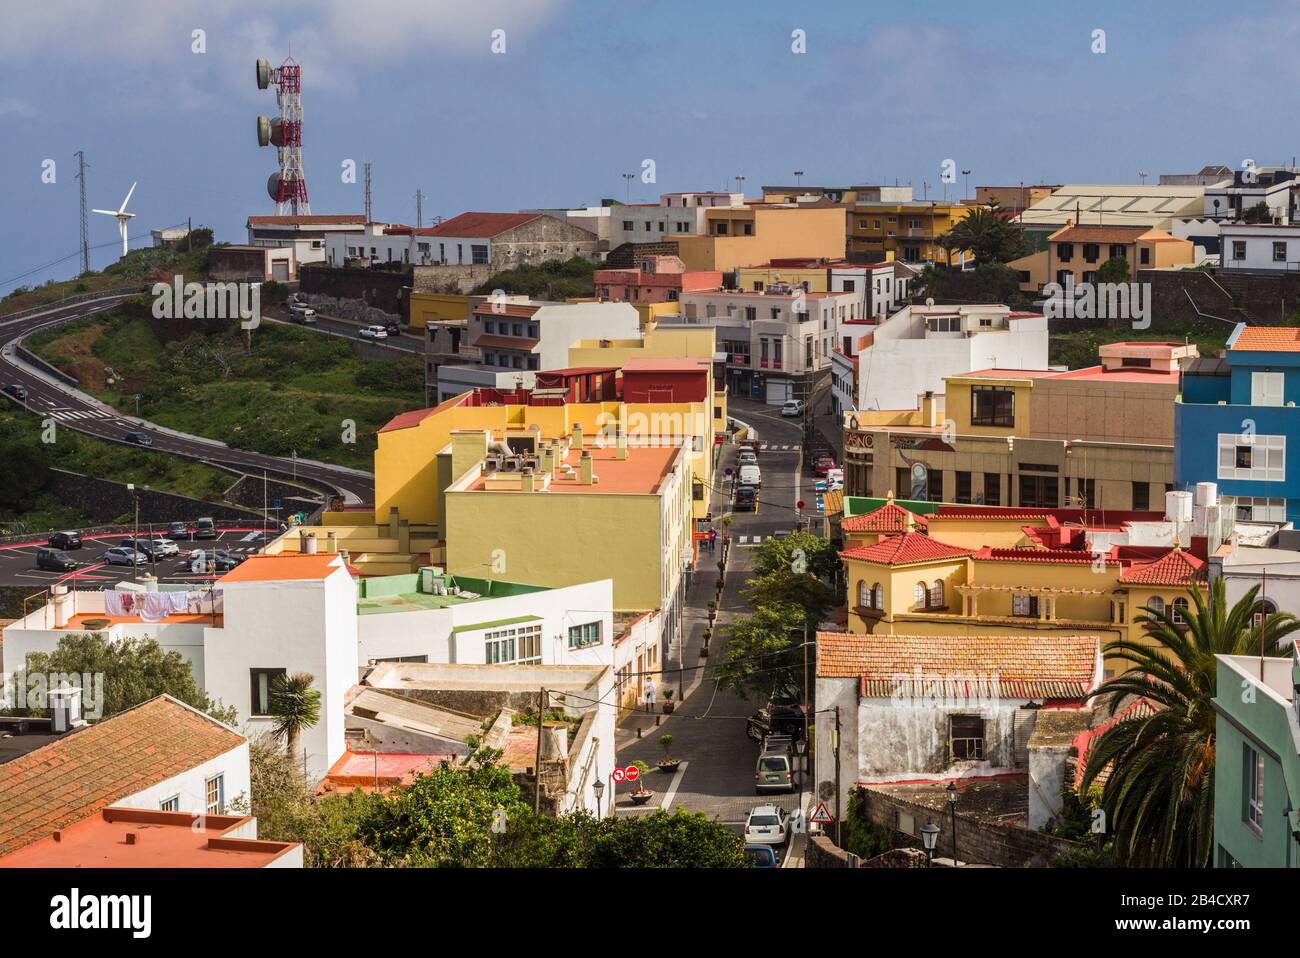 Spain, Canary Islands, El Hierro Island, Valverde, island capital, elevated town view from the west Stock Photo